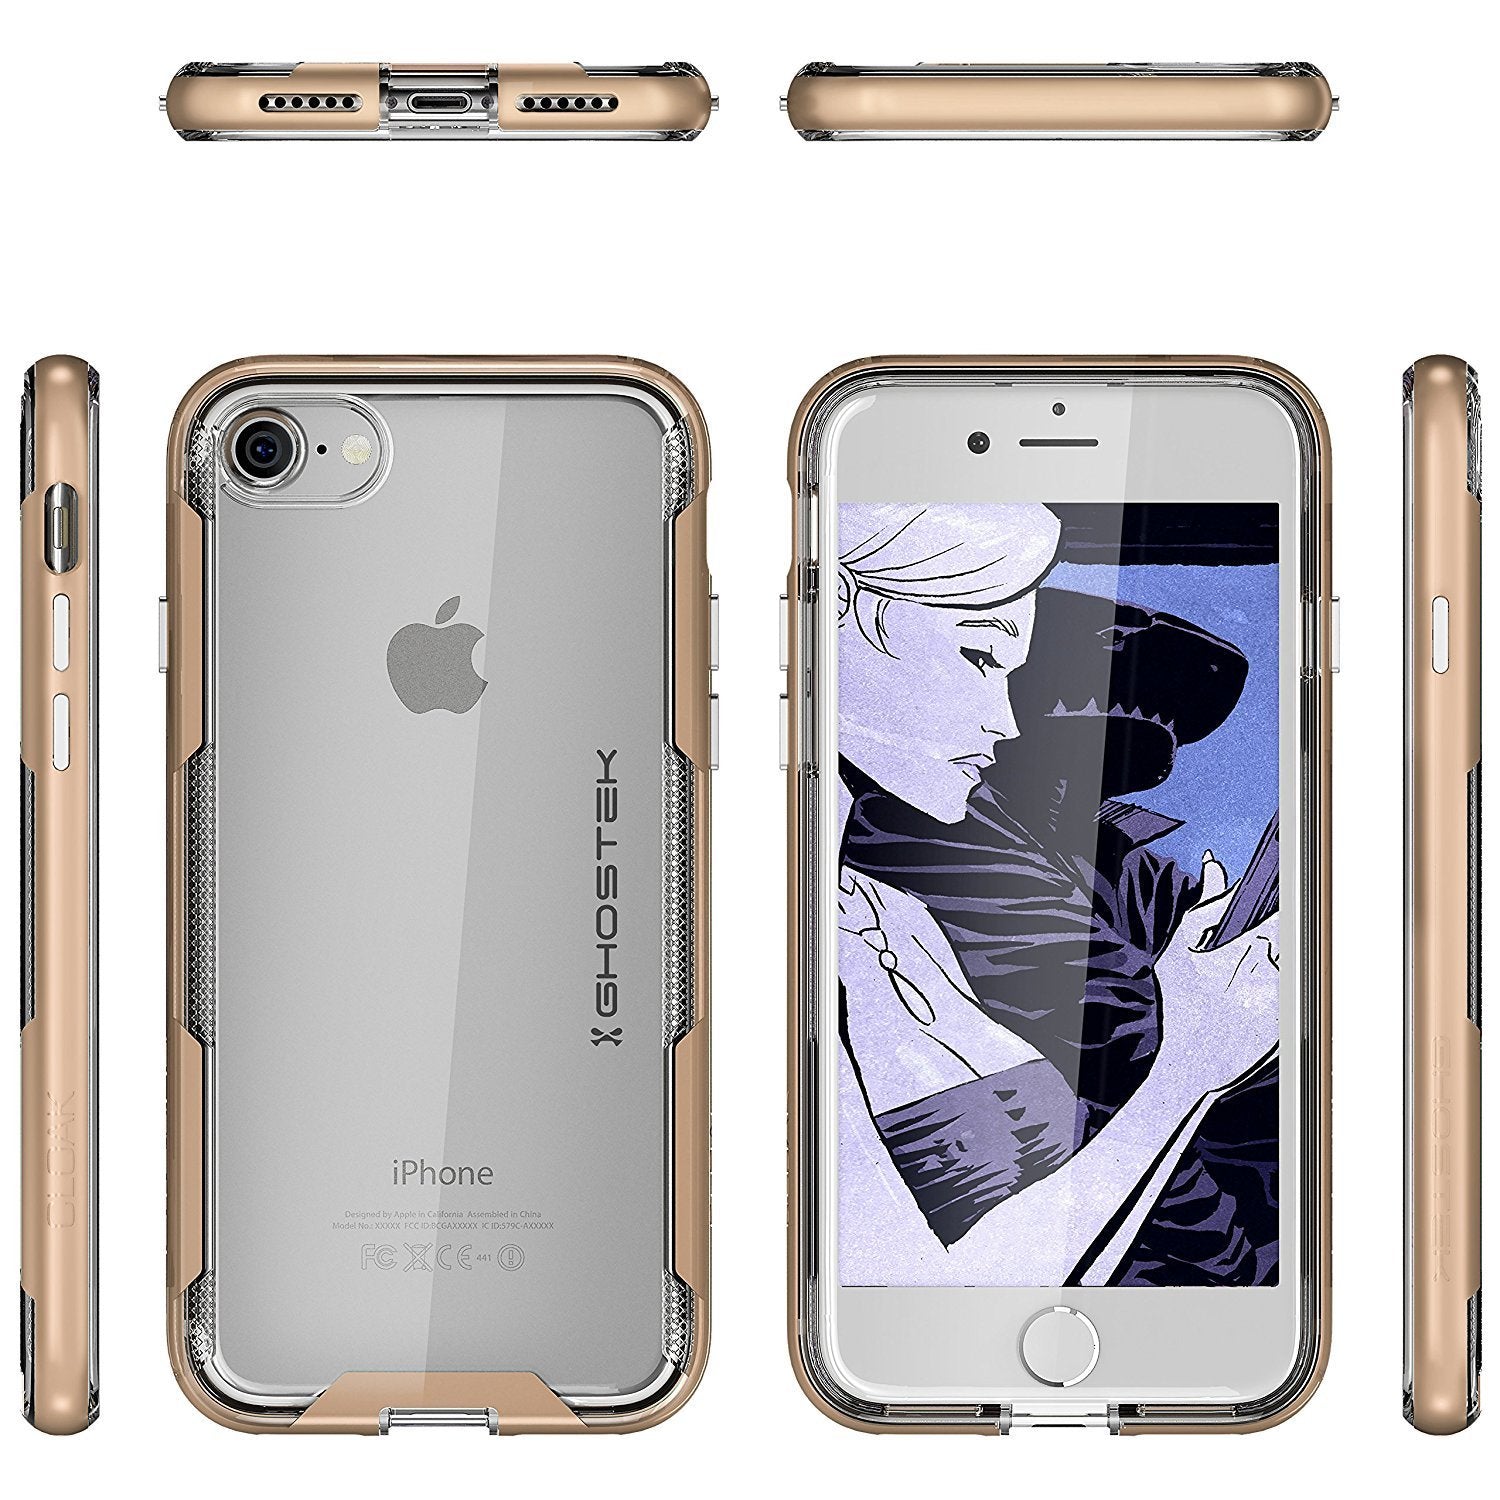 iPhone 8 Case, Ghostek Cloak 3 Series Case for iPhone 8 Case Clear Protective Case [GOLD] - PunkCase NZ